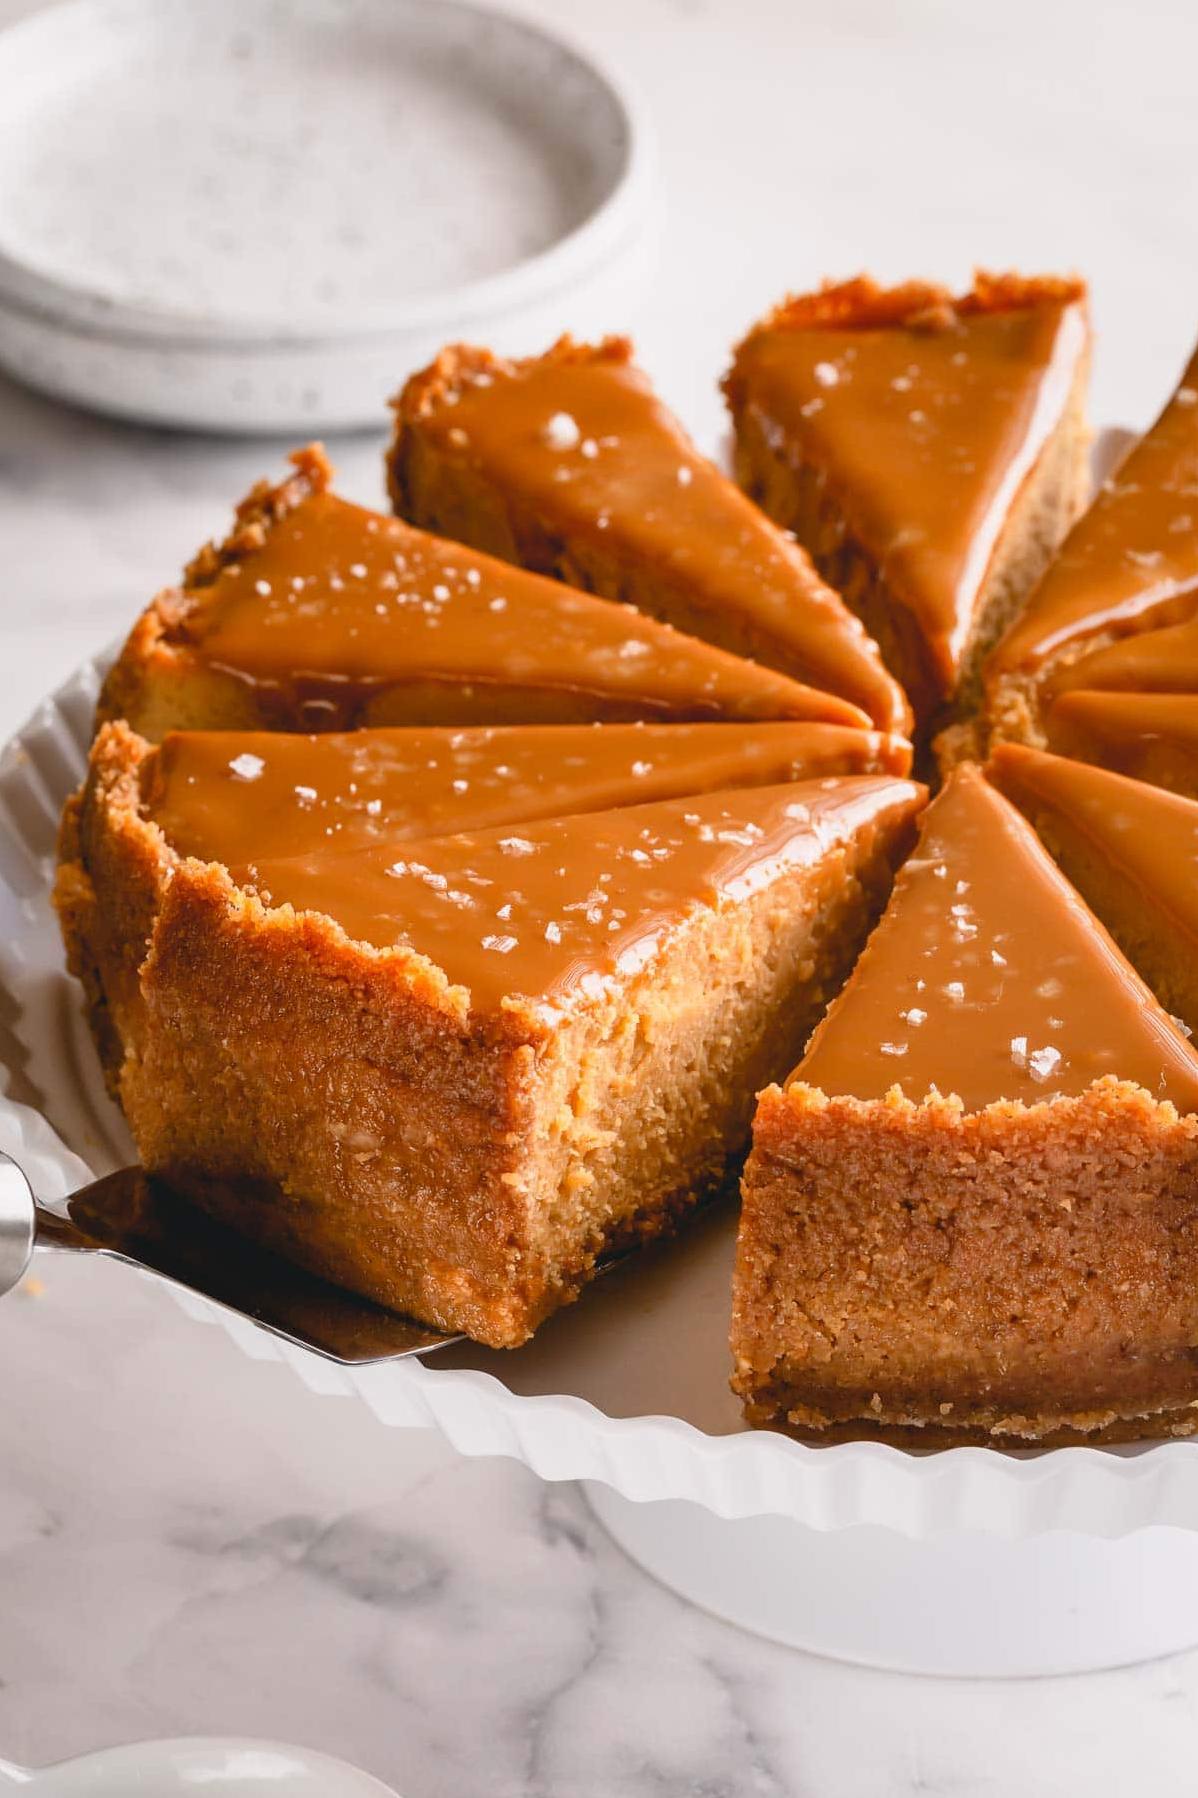  You won't believe your taste buds when you try this dulce de leche cheesecake